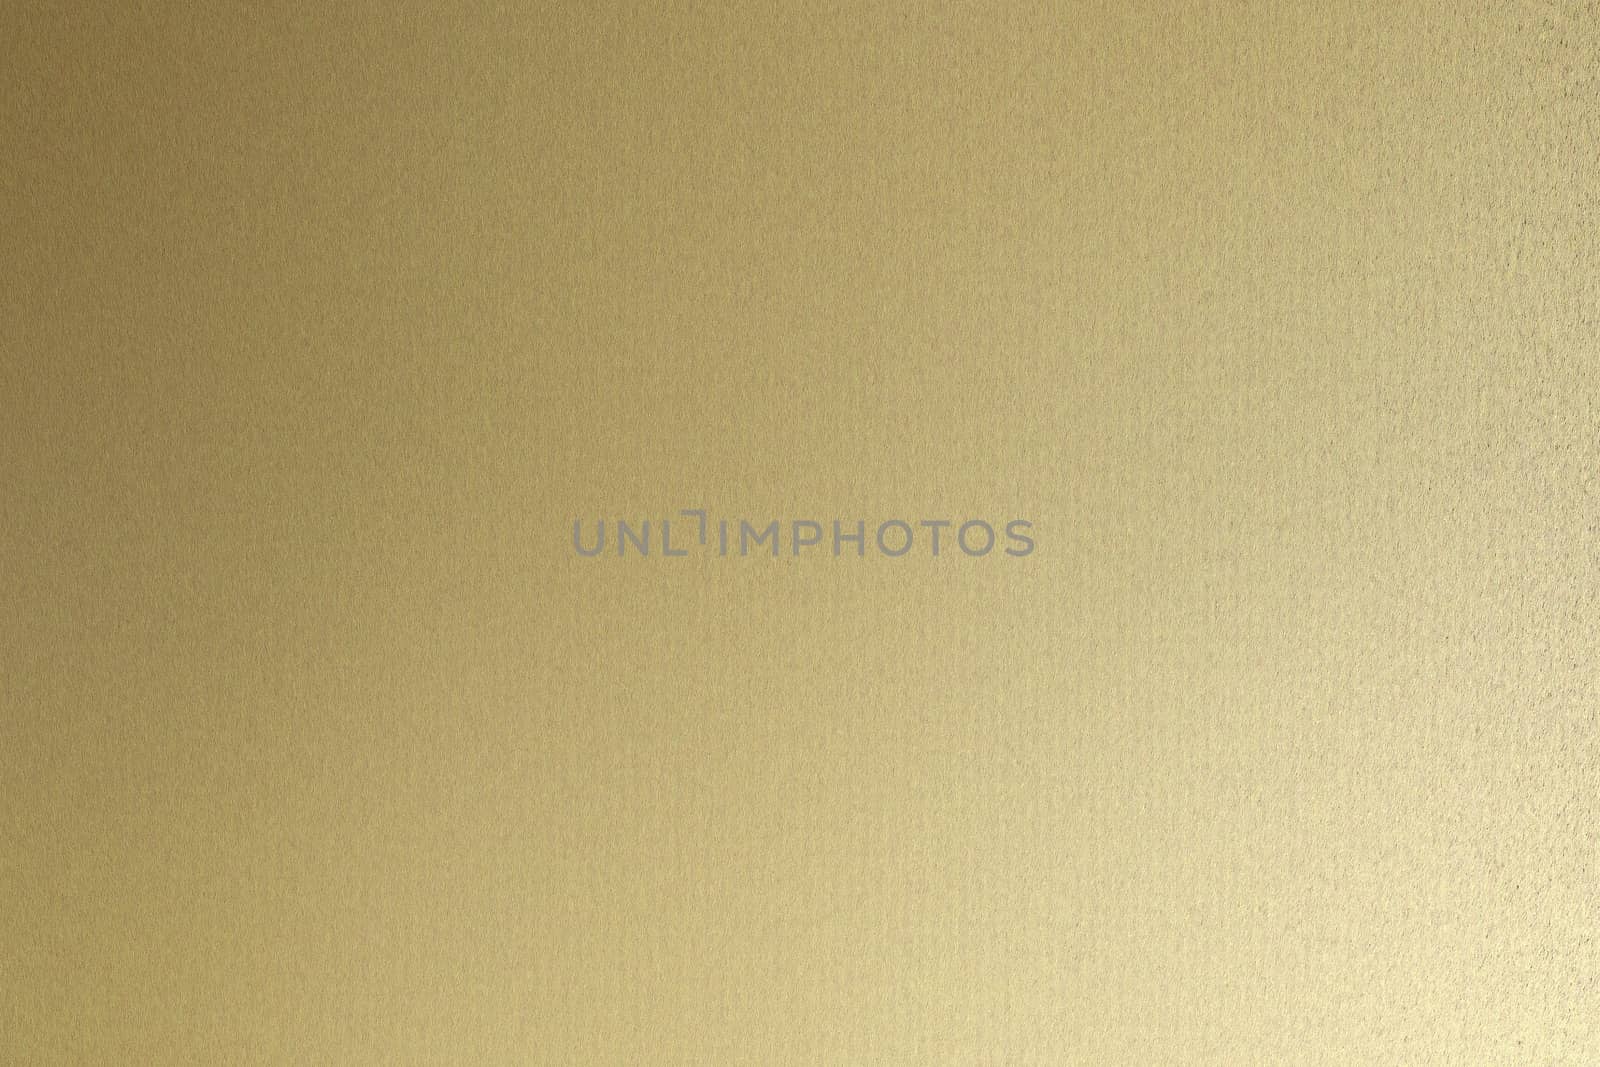 Rough gold metallic sheet board, abstract texture background by mouu007